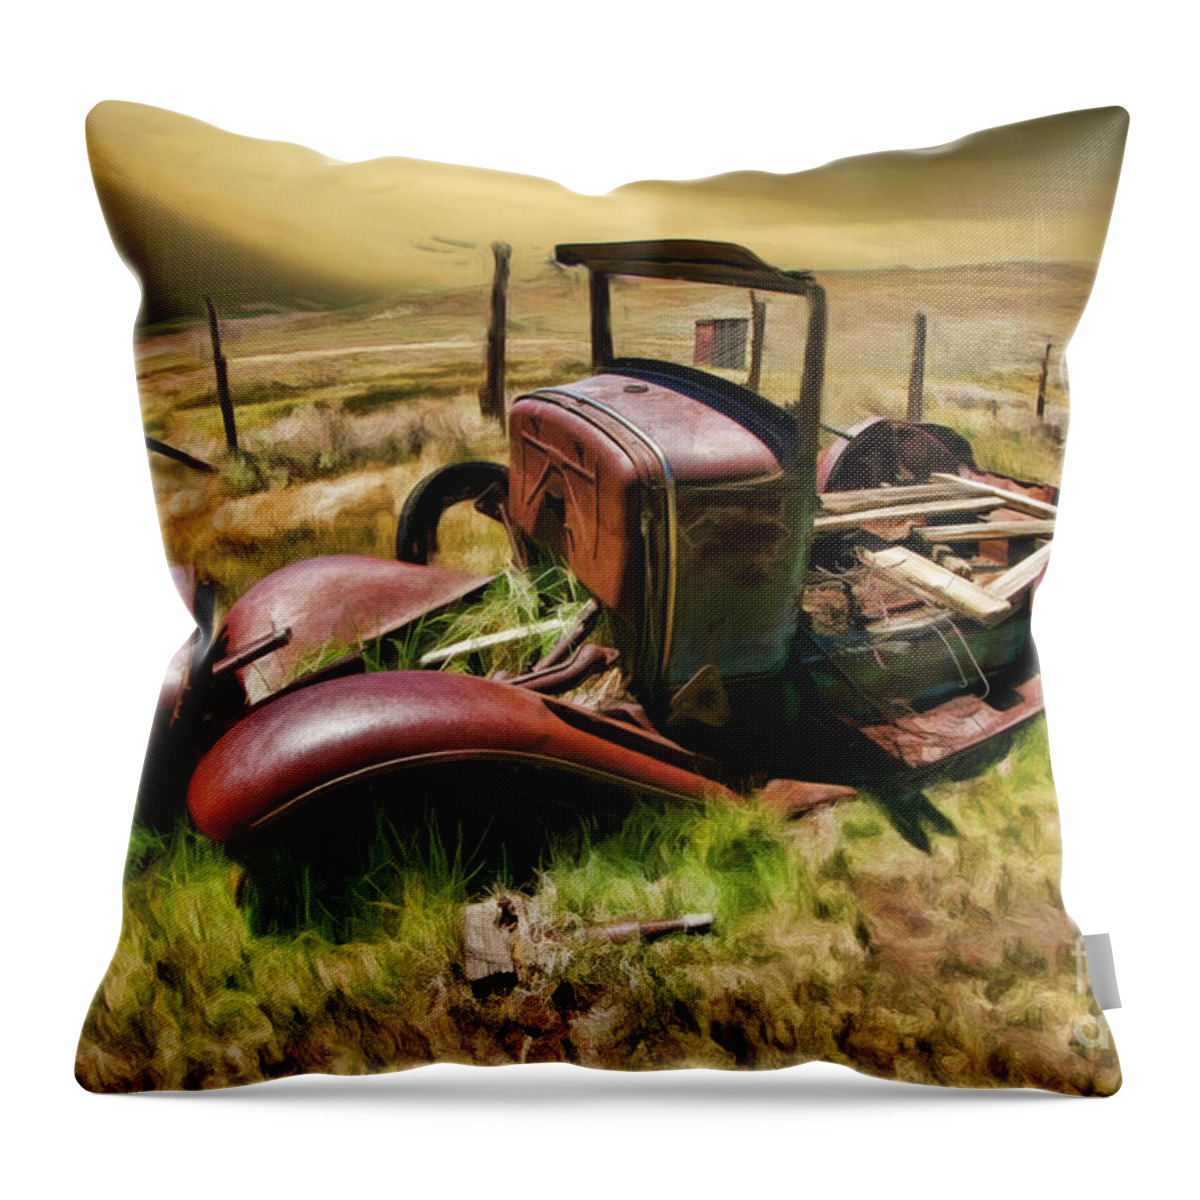 Bodie Classic Throw Pillow featuring the photograph Bodie Classic by Blake Richards